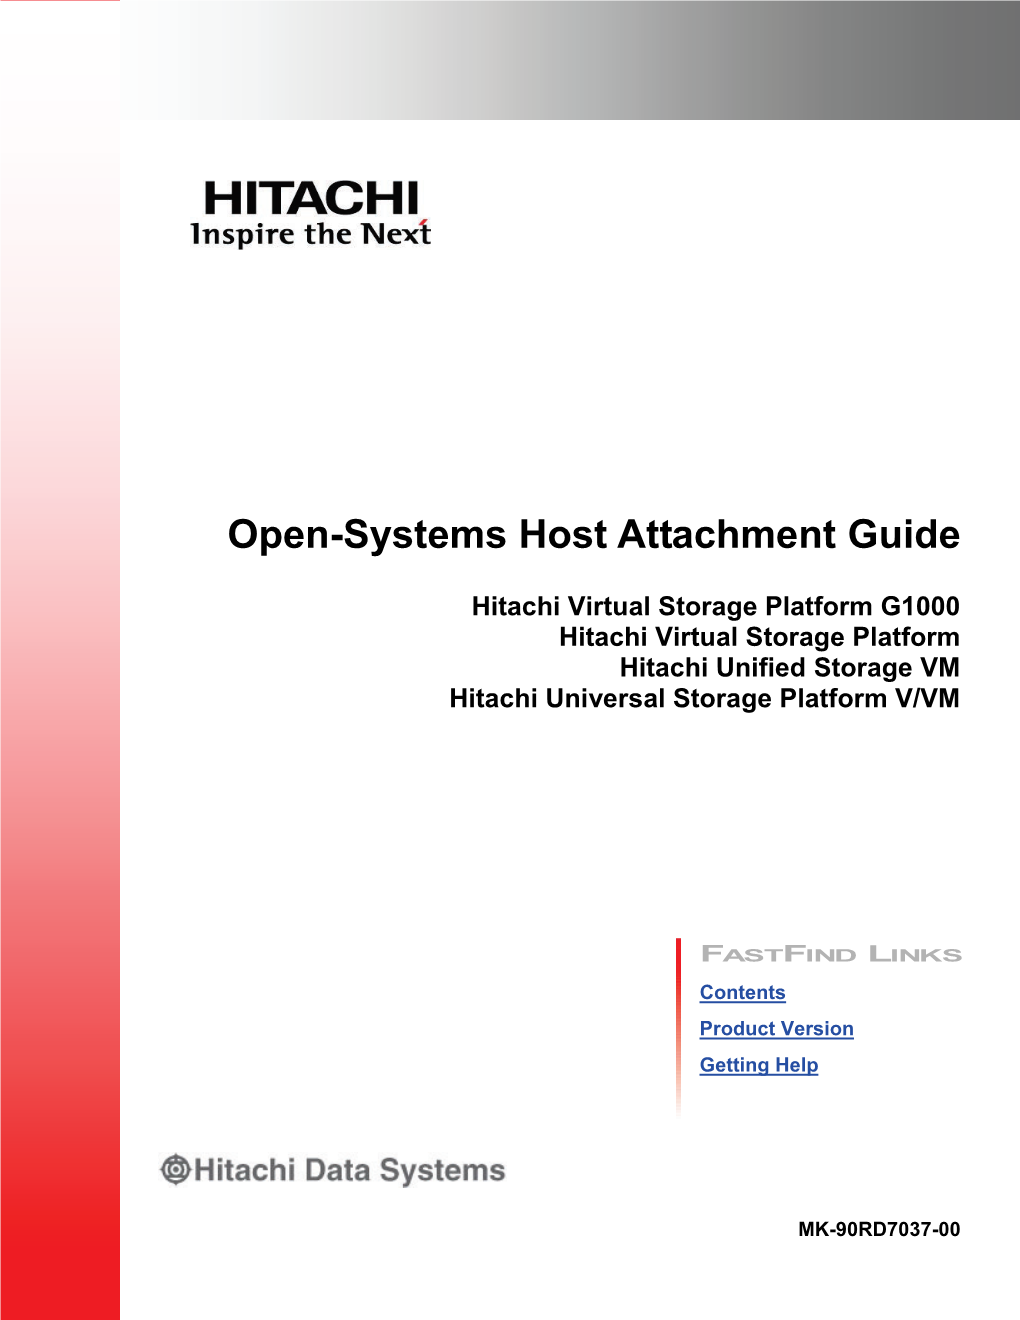 Open-Systems Host Attachment Guide